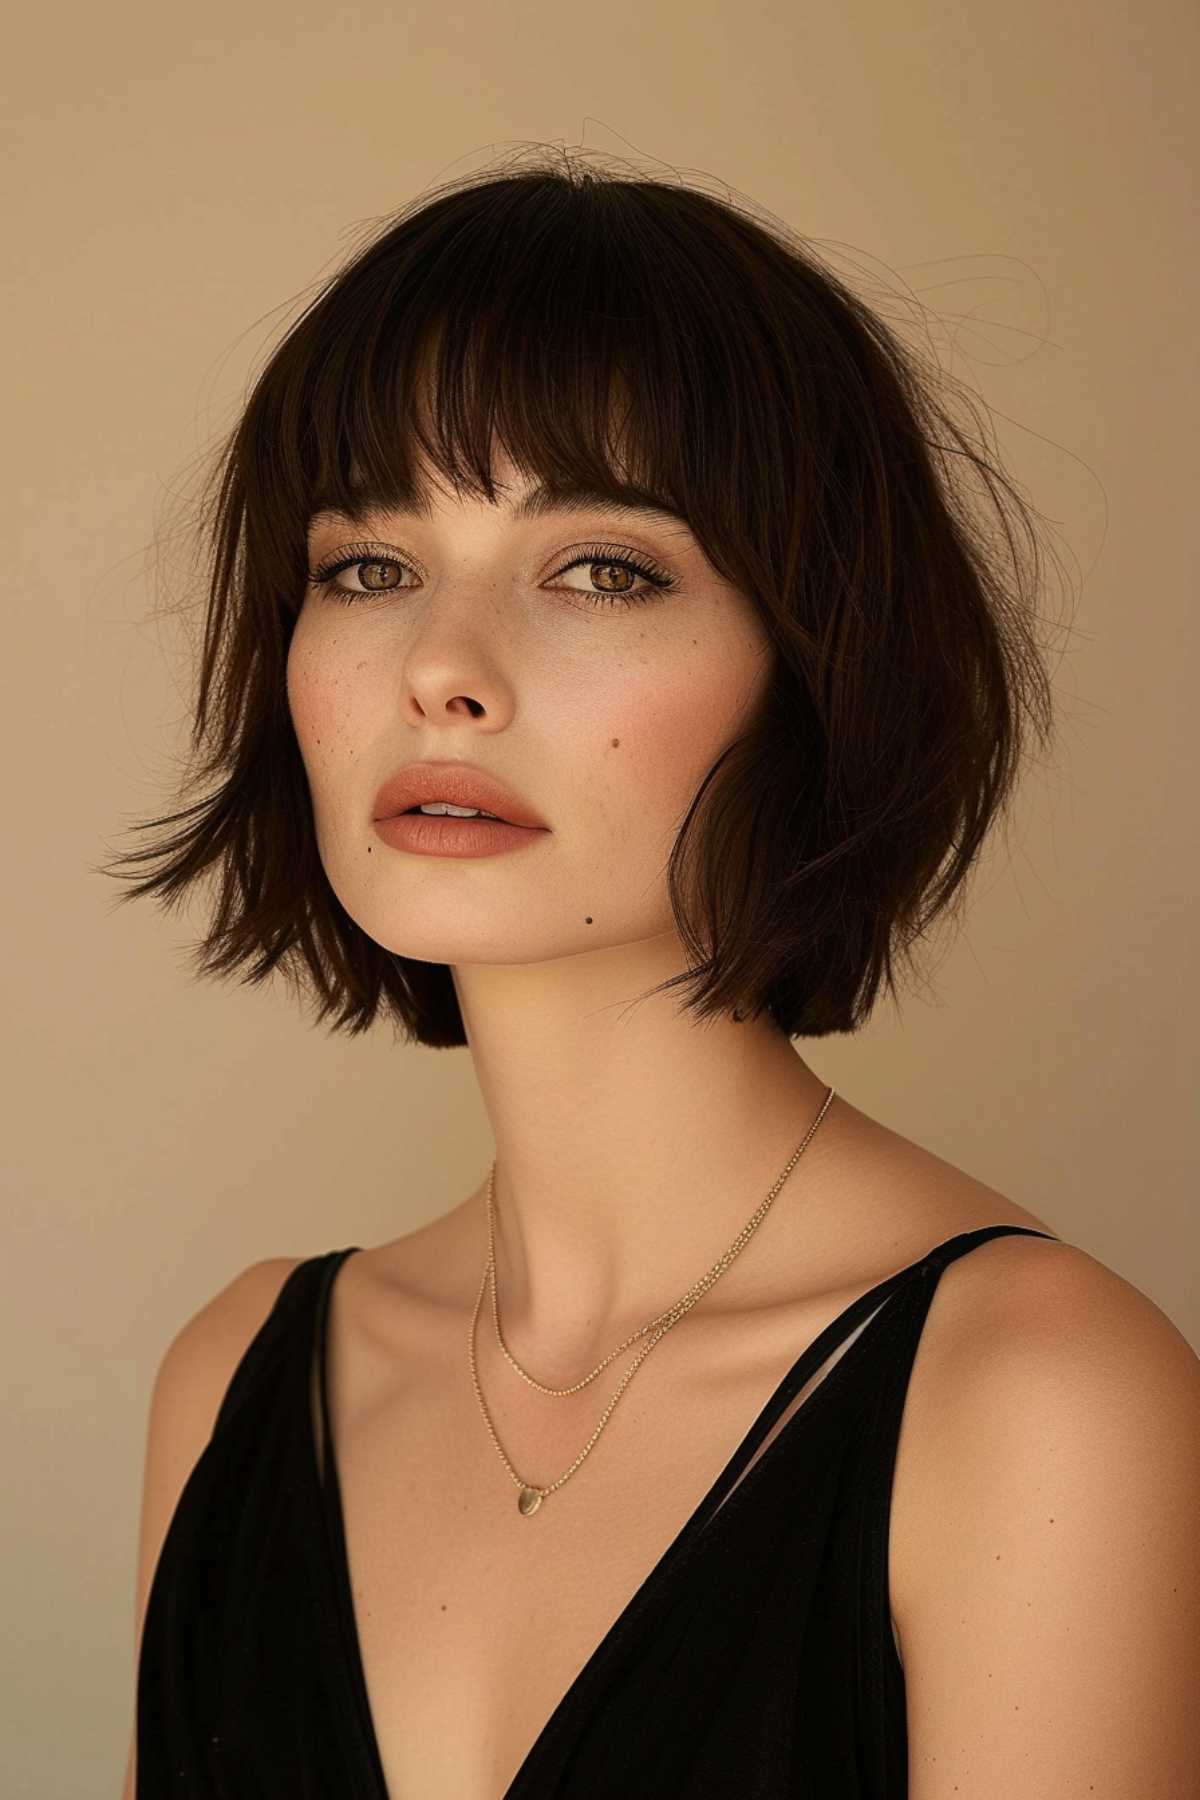 Neck-Length Textured Cut with Fringe for Long Faces